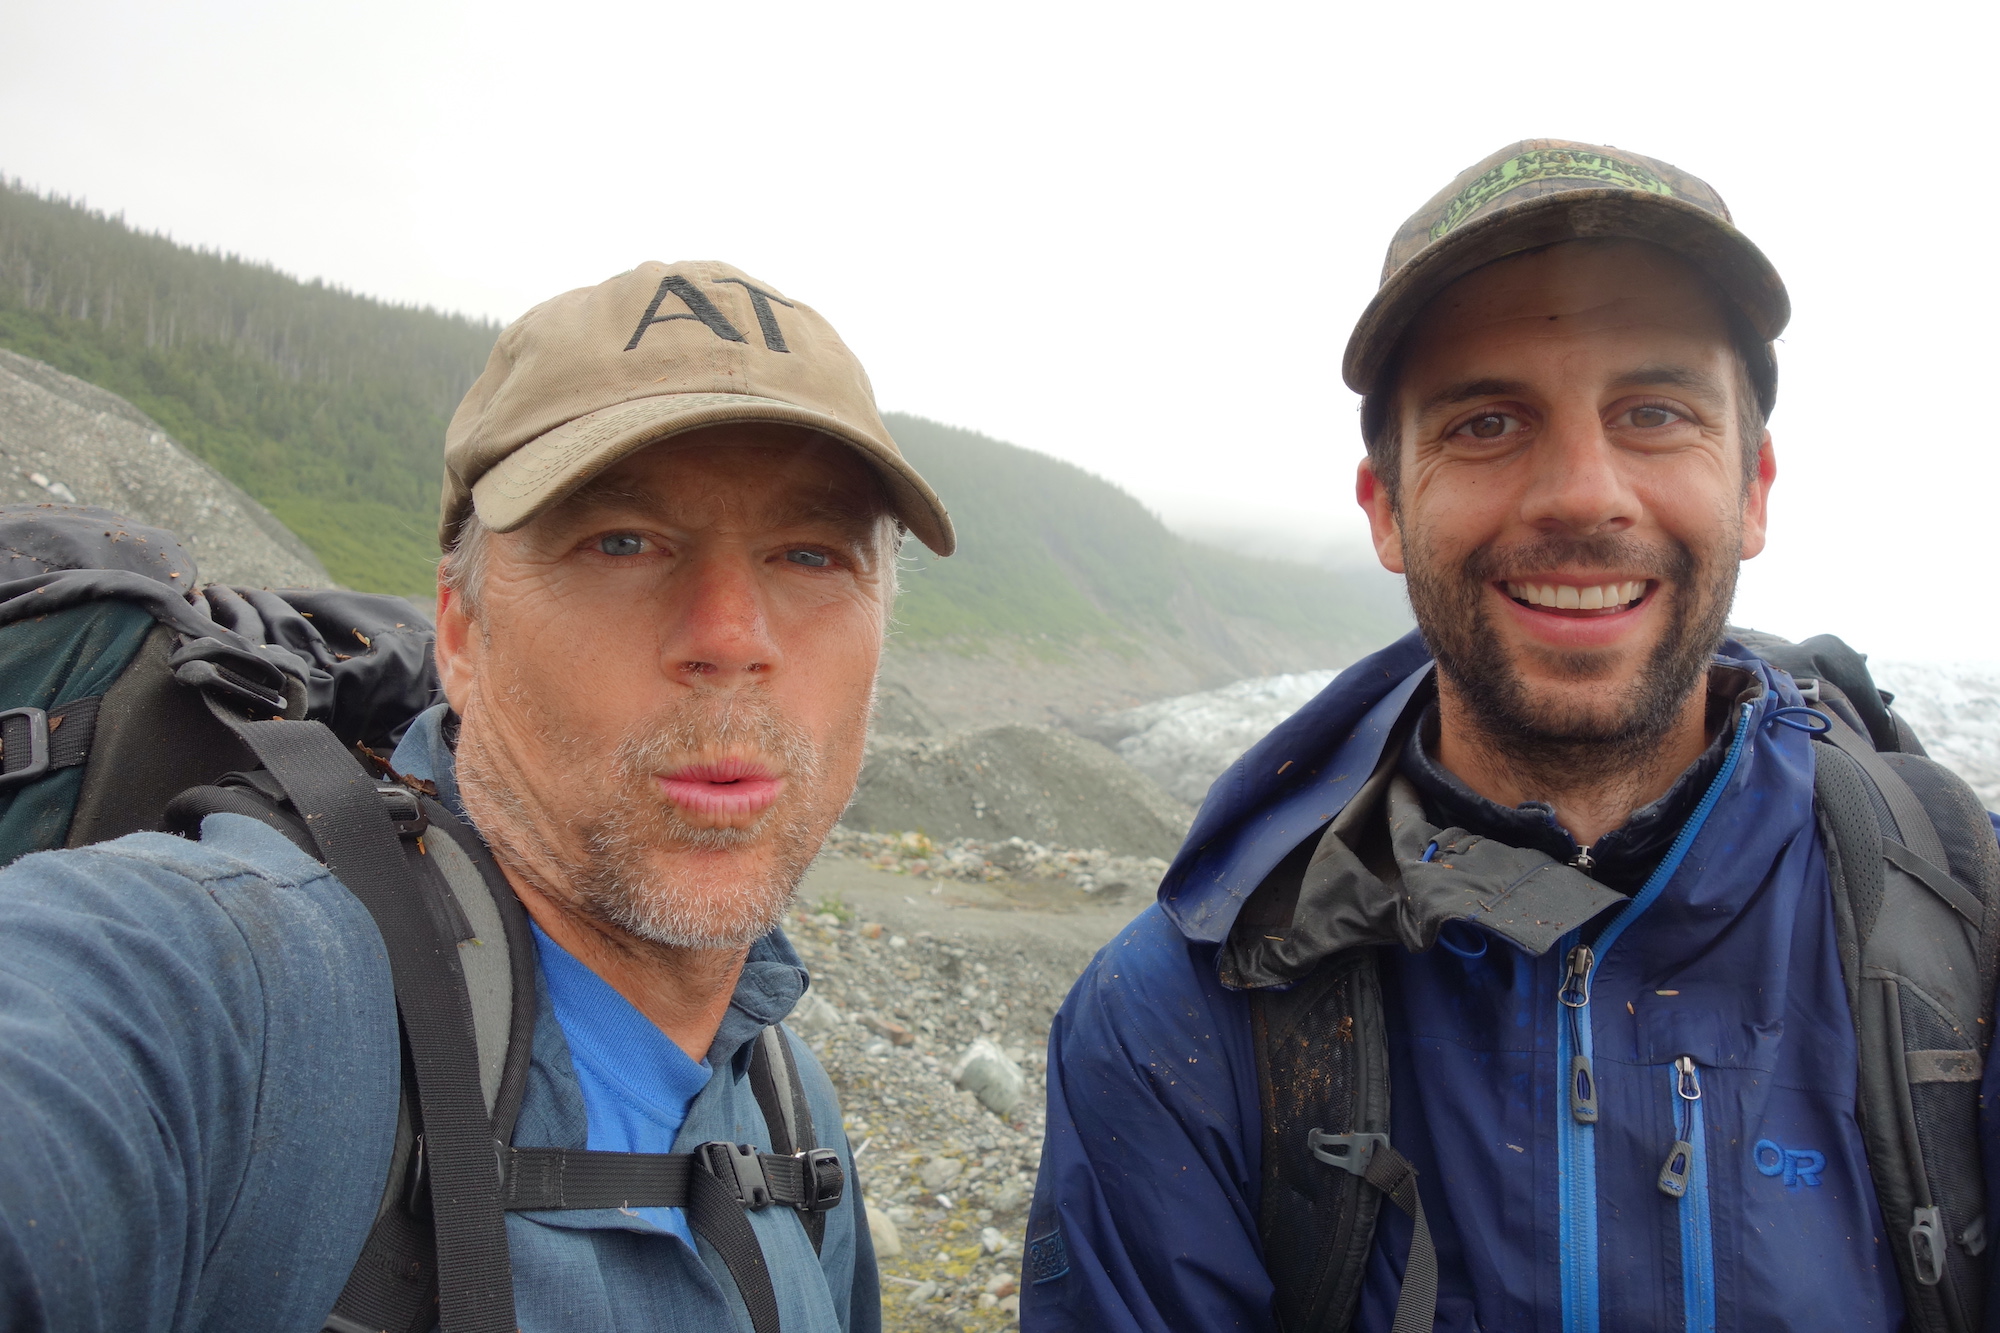 Two men smile at the camera while standing in a gravel-strewn area left by the recent melting of a glacier.